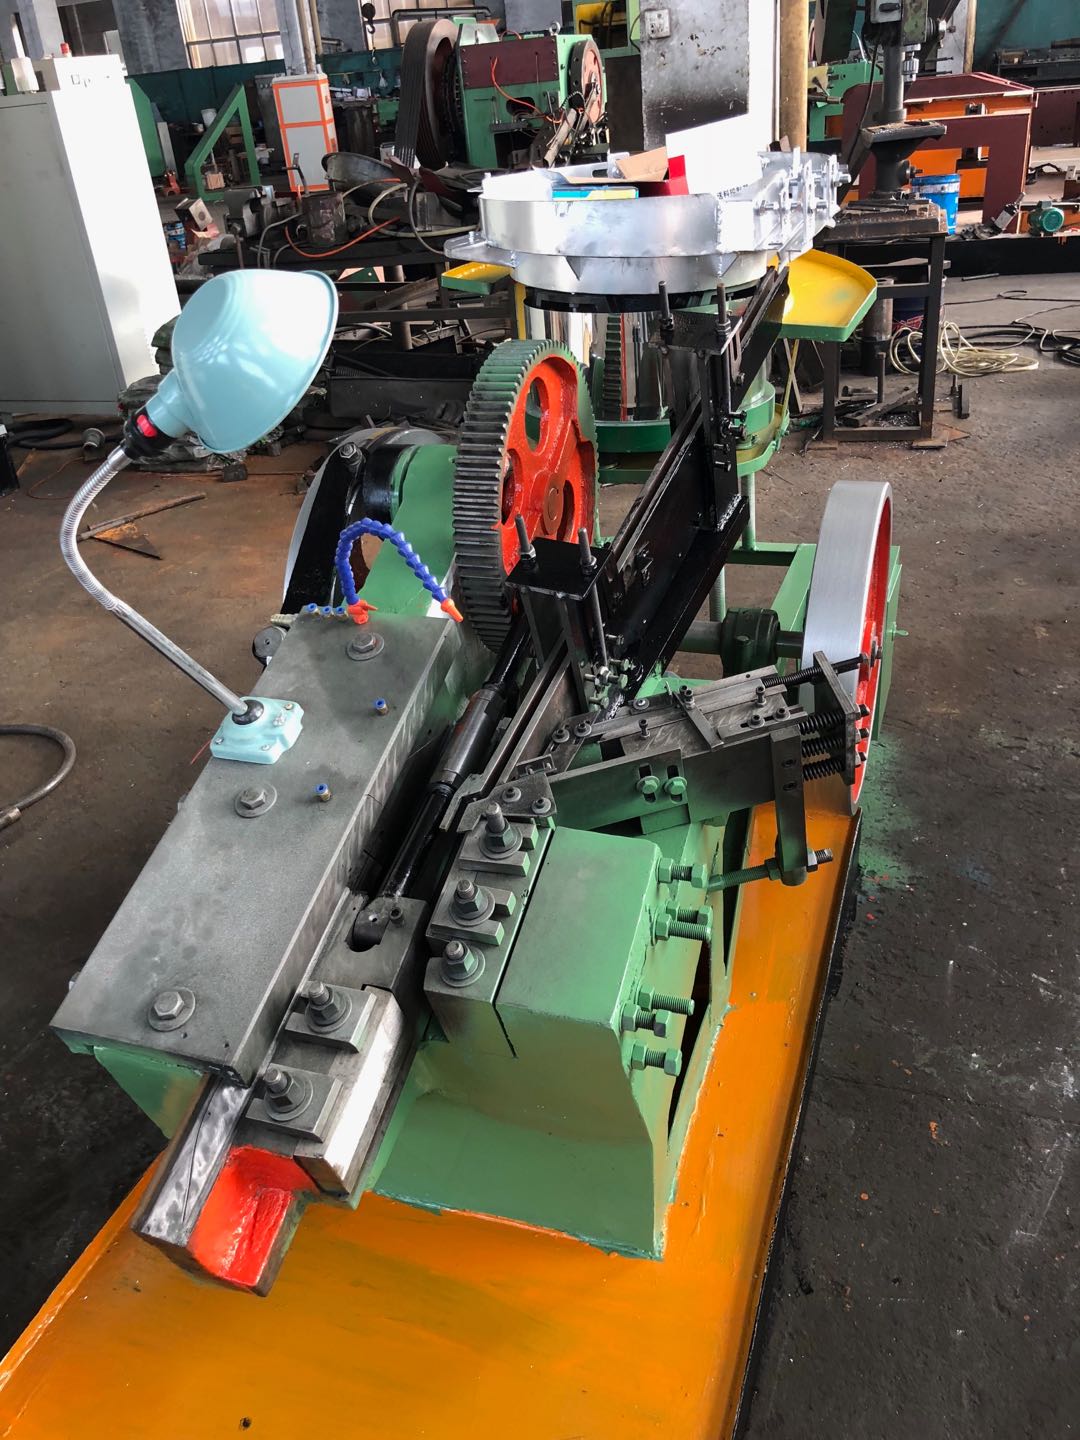 Automatic Screw Cold Heading Forging Machine for Screw